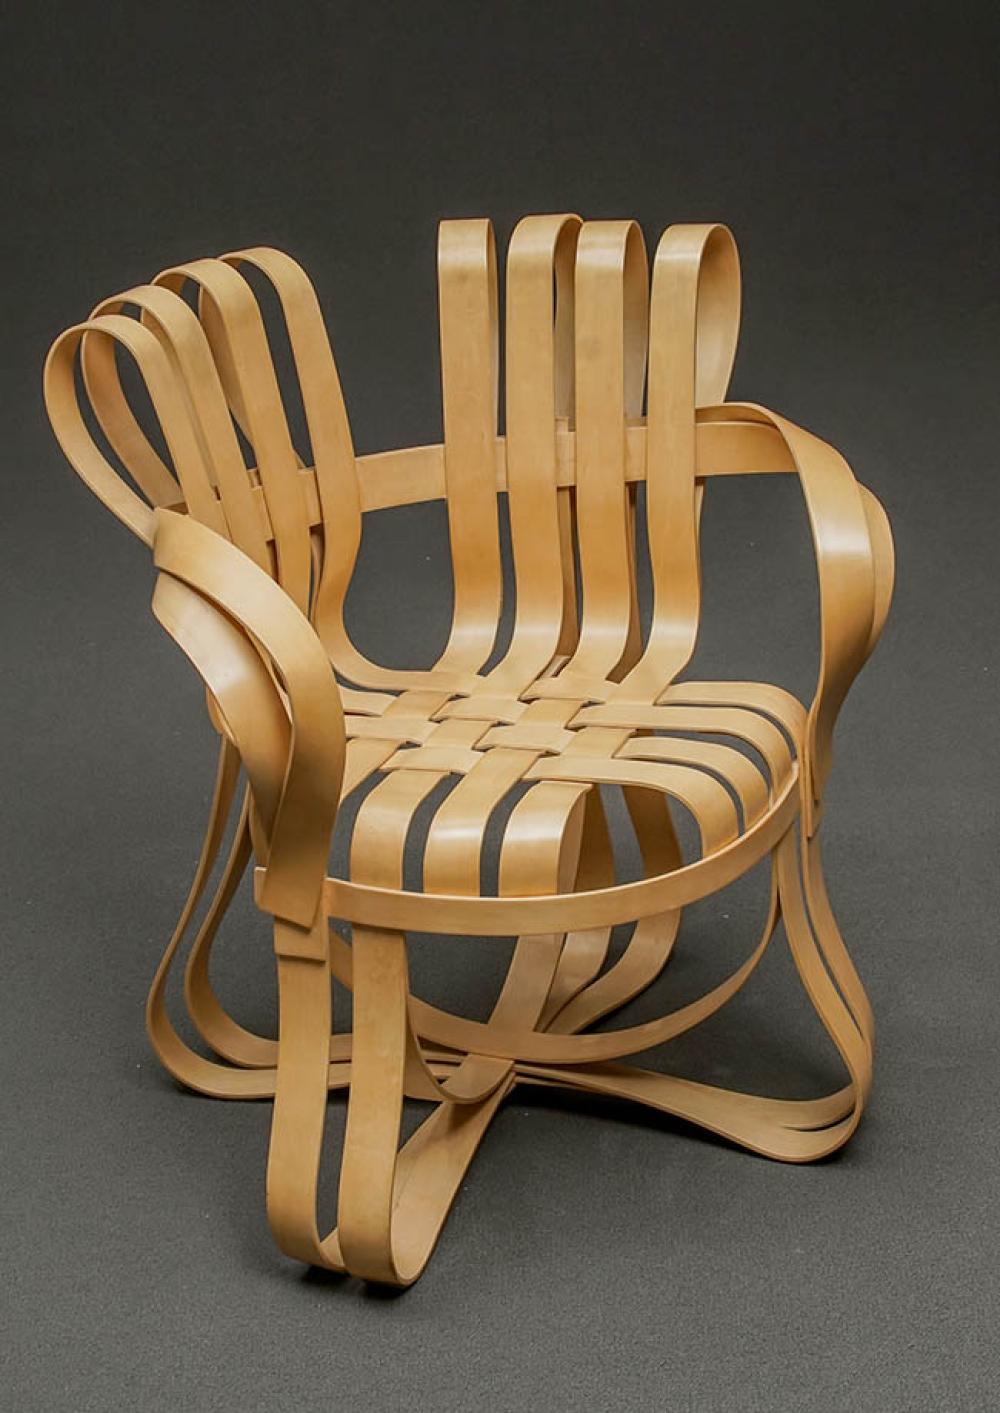 FRANK GEHRY BENT AND LAMINATED 324b83